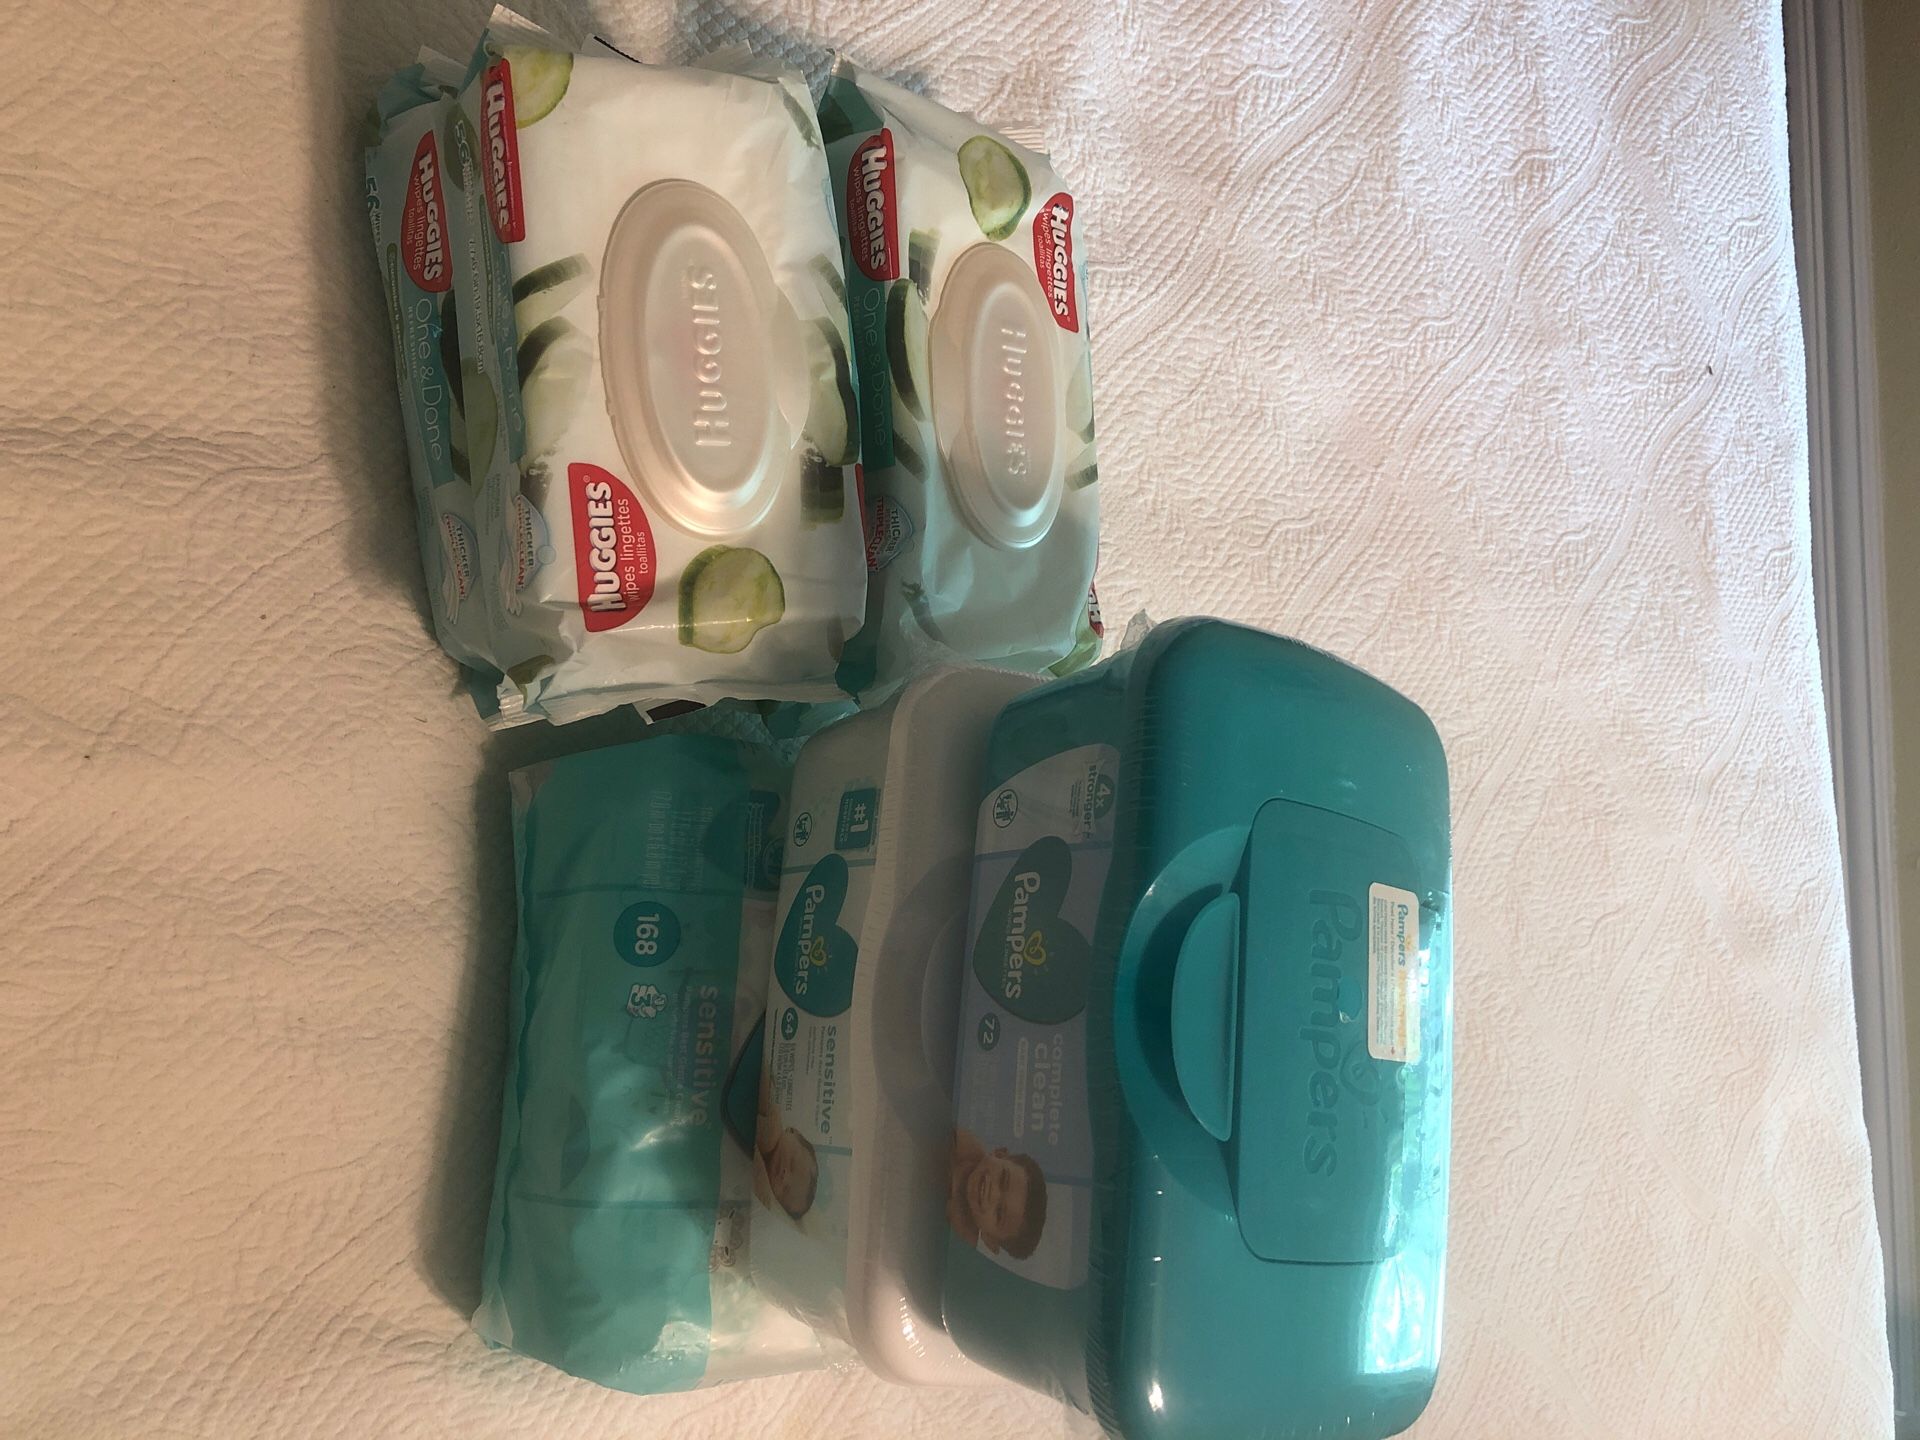 Wipes of different types of baby packages